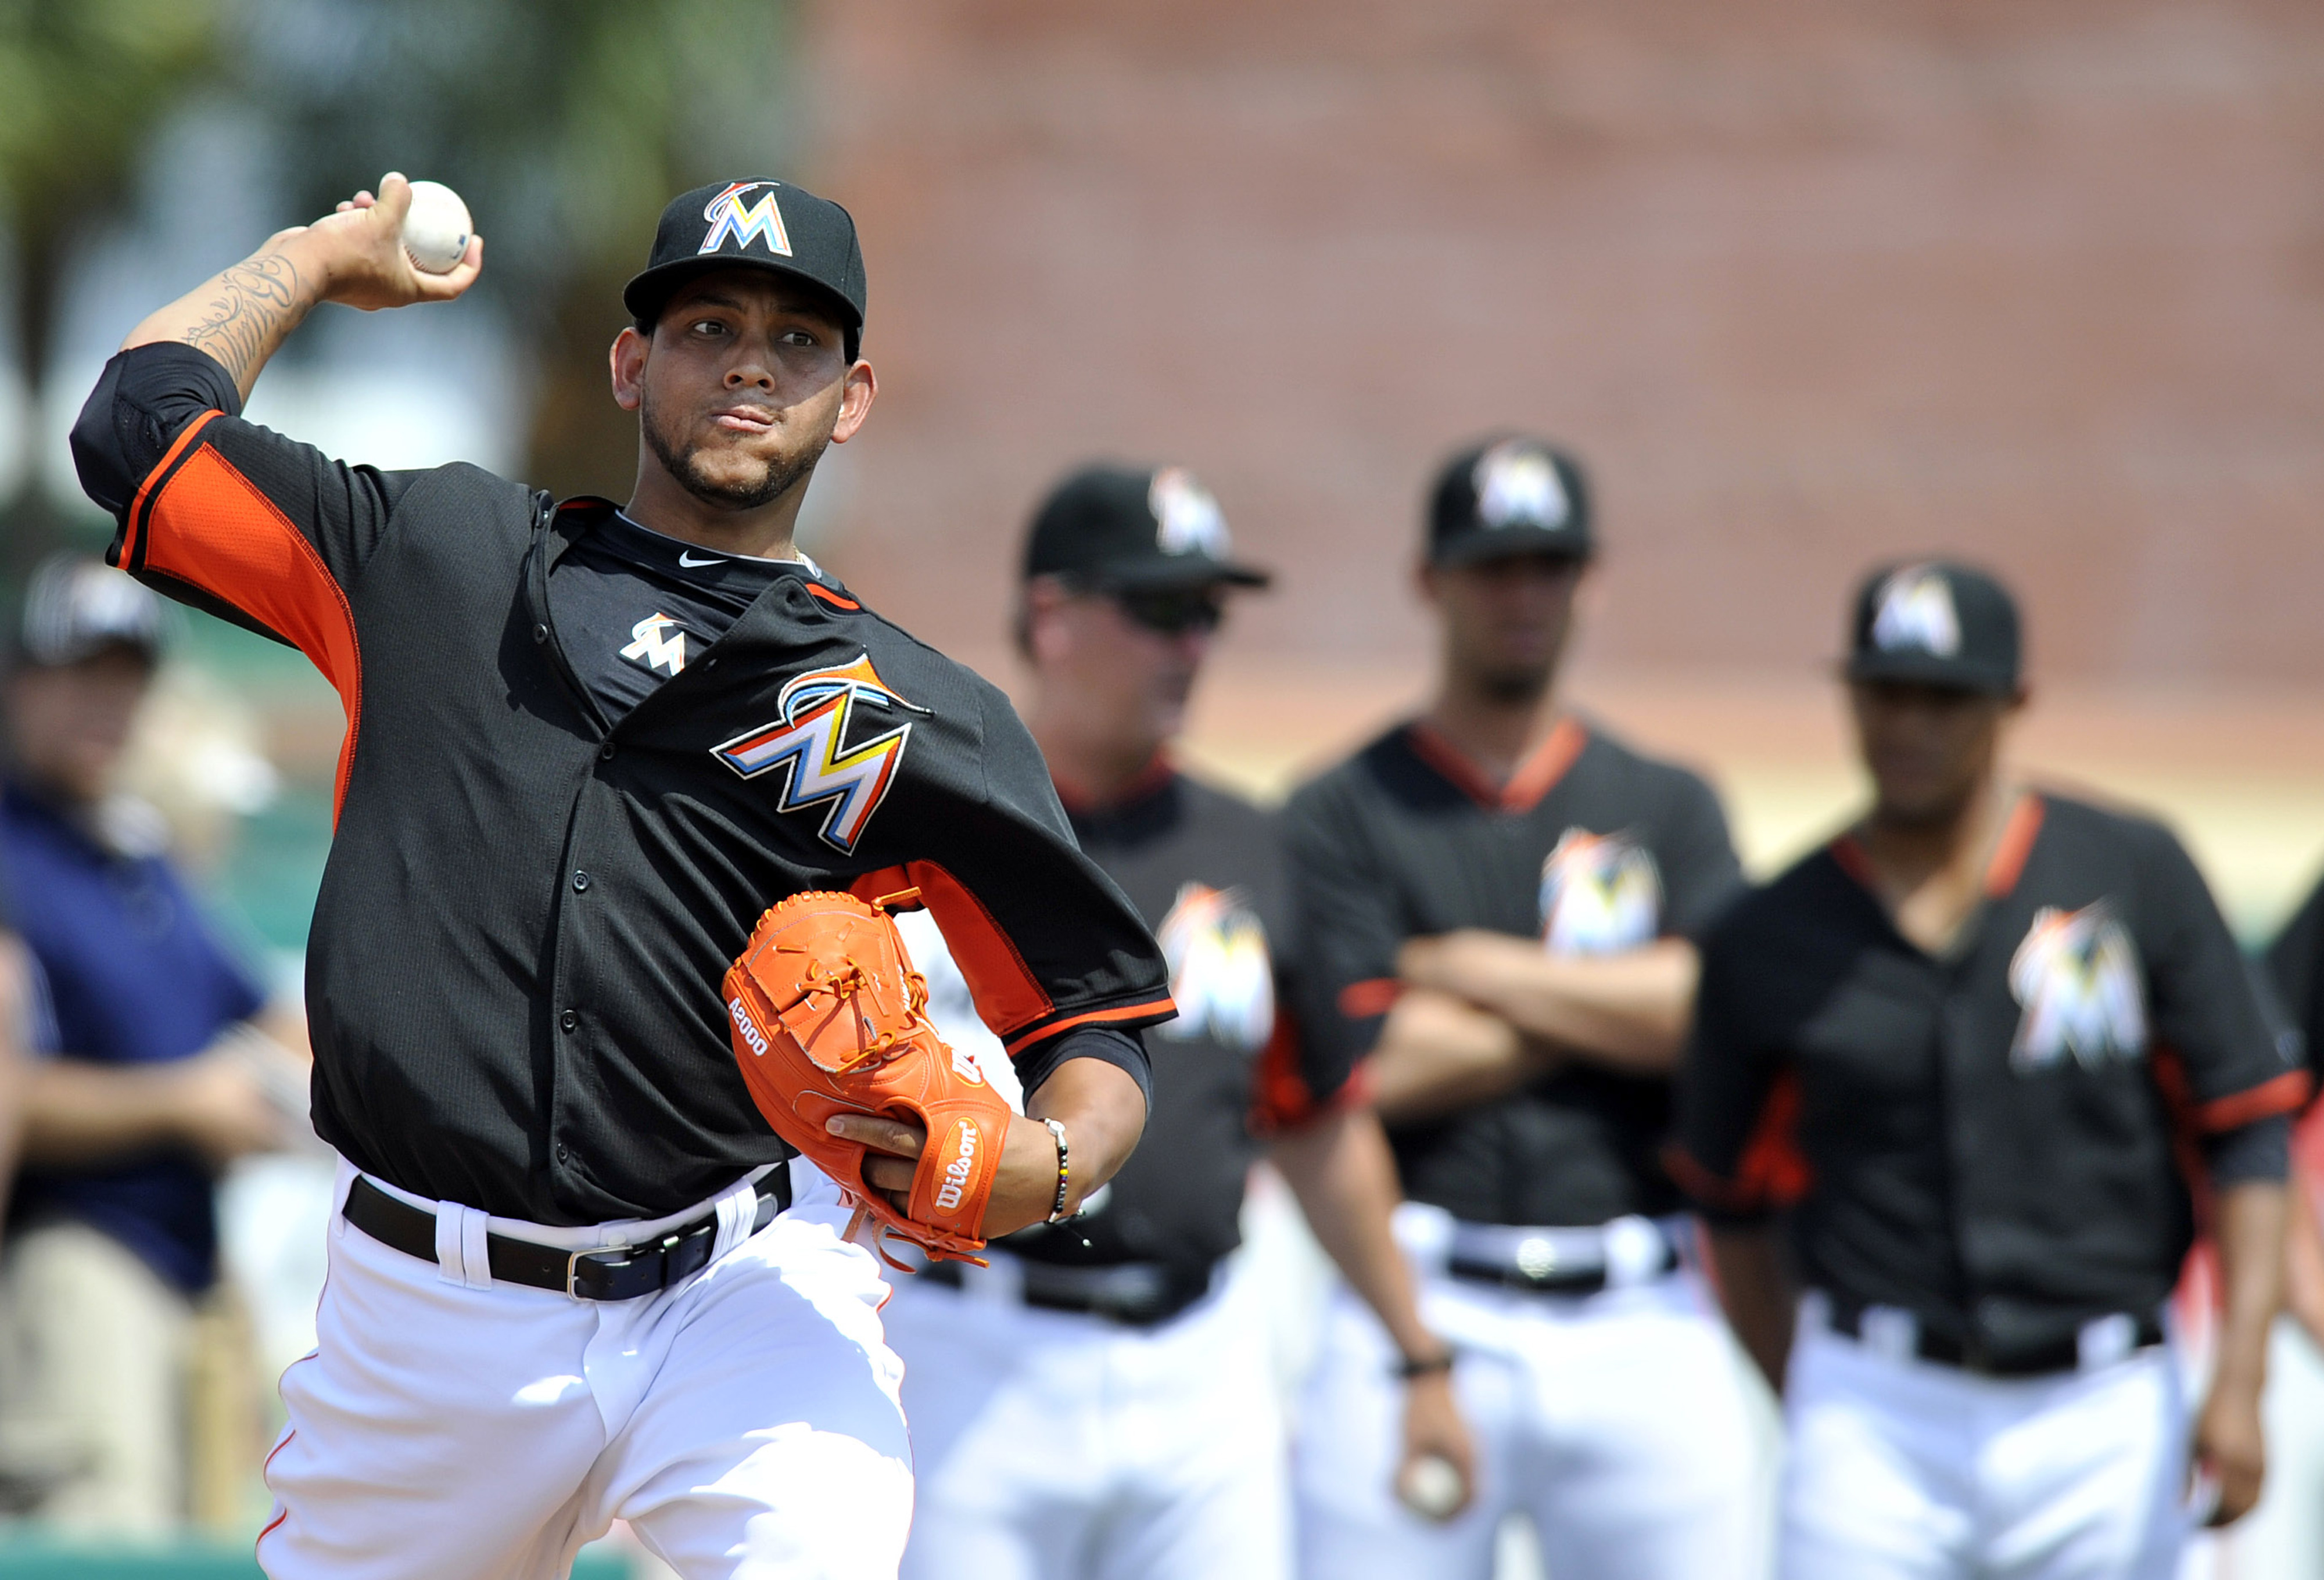 Henderson Alvarez and the rest of the Marlins rotation did a solid job in 2014.